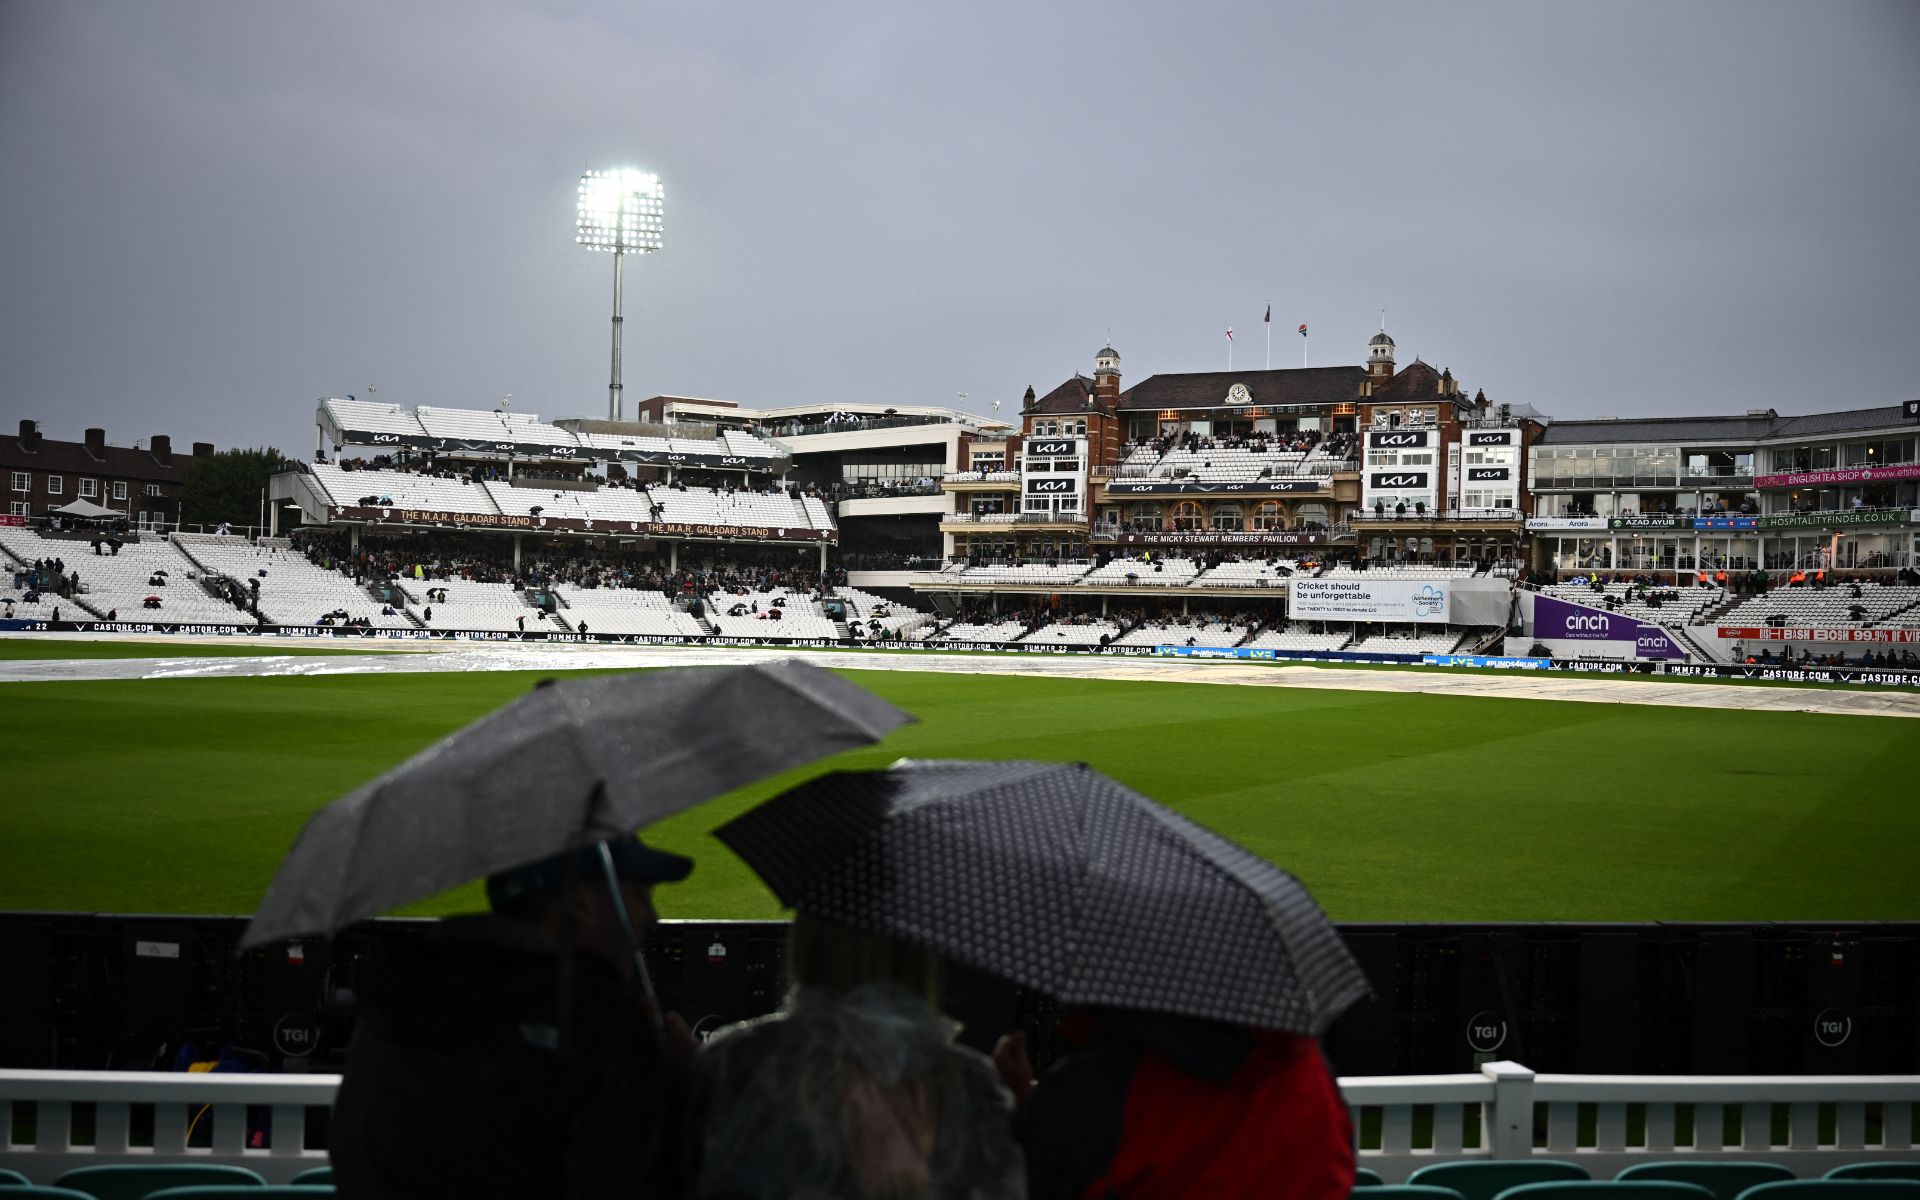 ENG vs PAK 4th T20I Weather Report: Heavy Rains And Thunderstorms Loom Large At The Oval